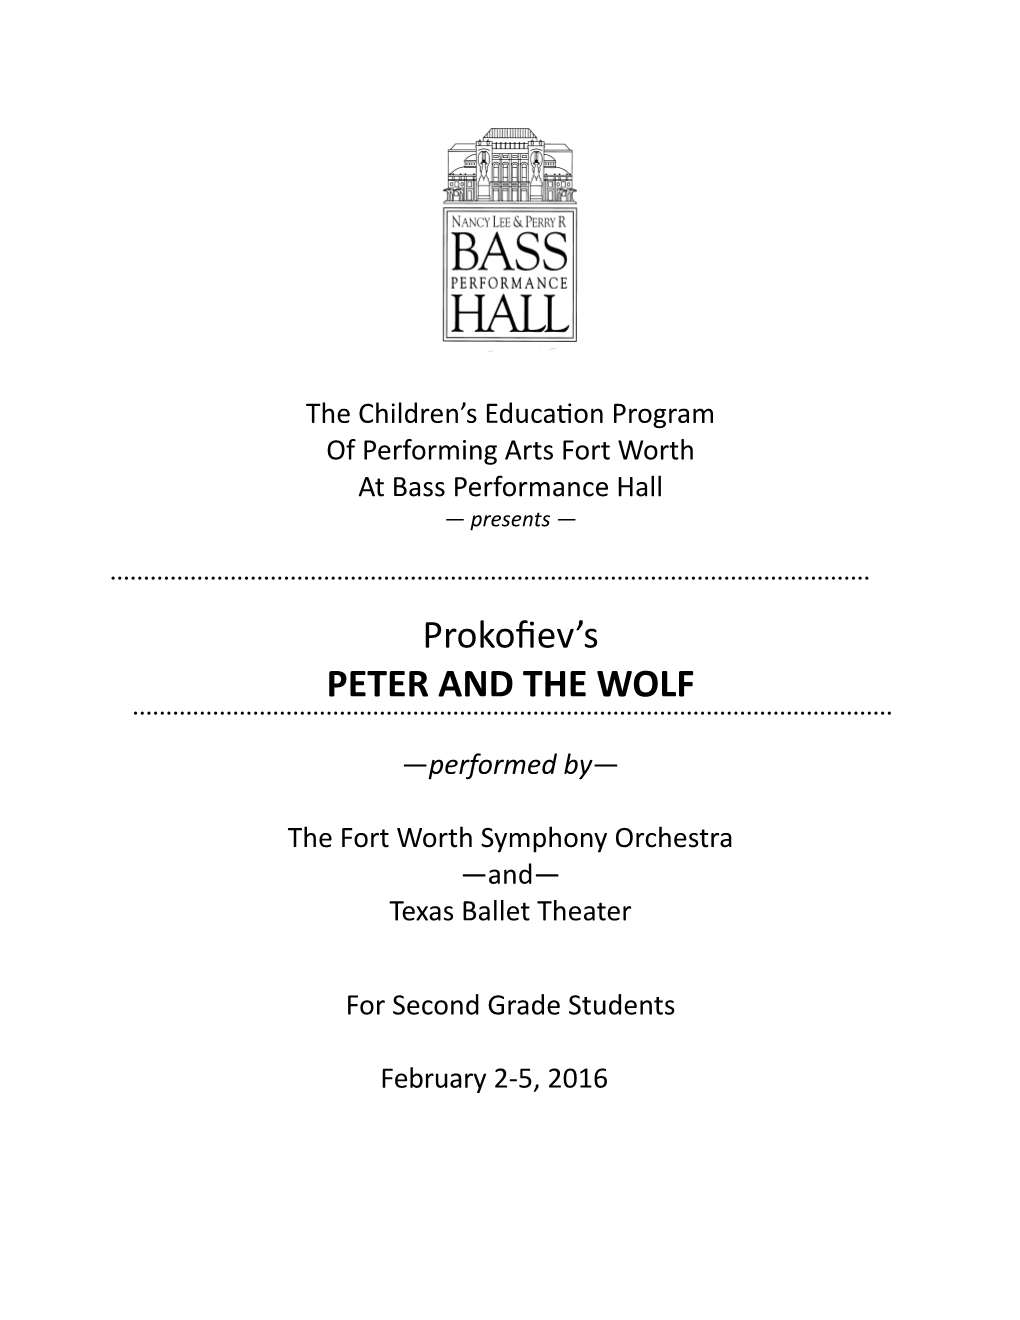 Prokofiev's PETER and the WOLF